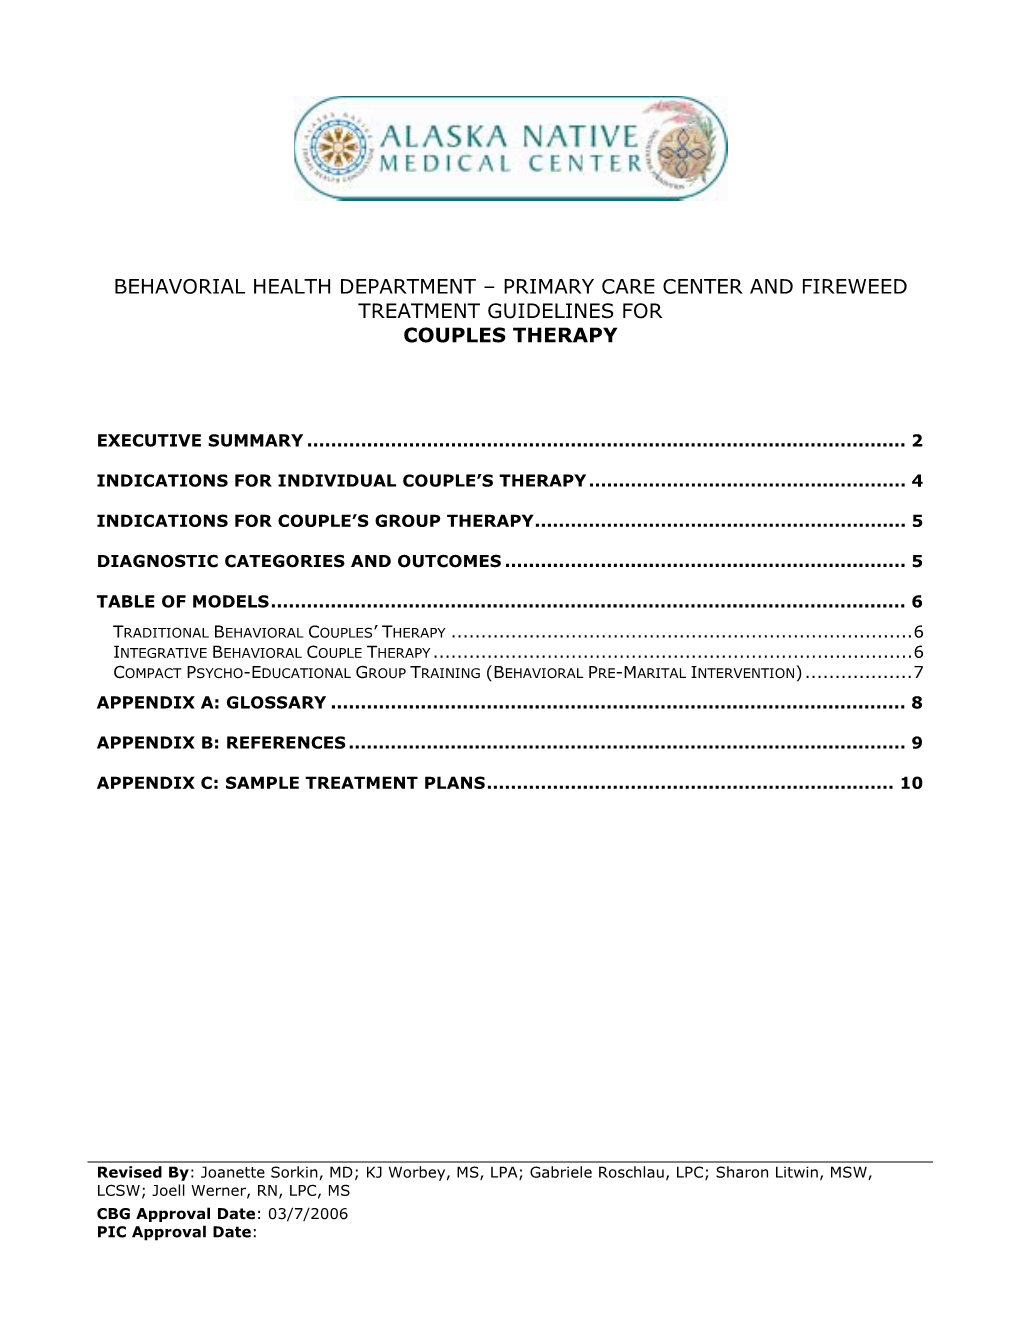 Behavorial Health Department – Primary Care Center and Fireweed Treatment Guidelines for Couples Therapy